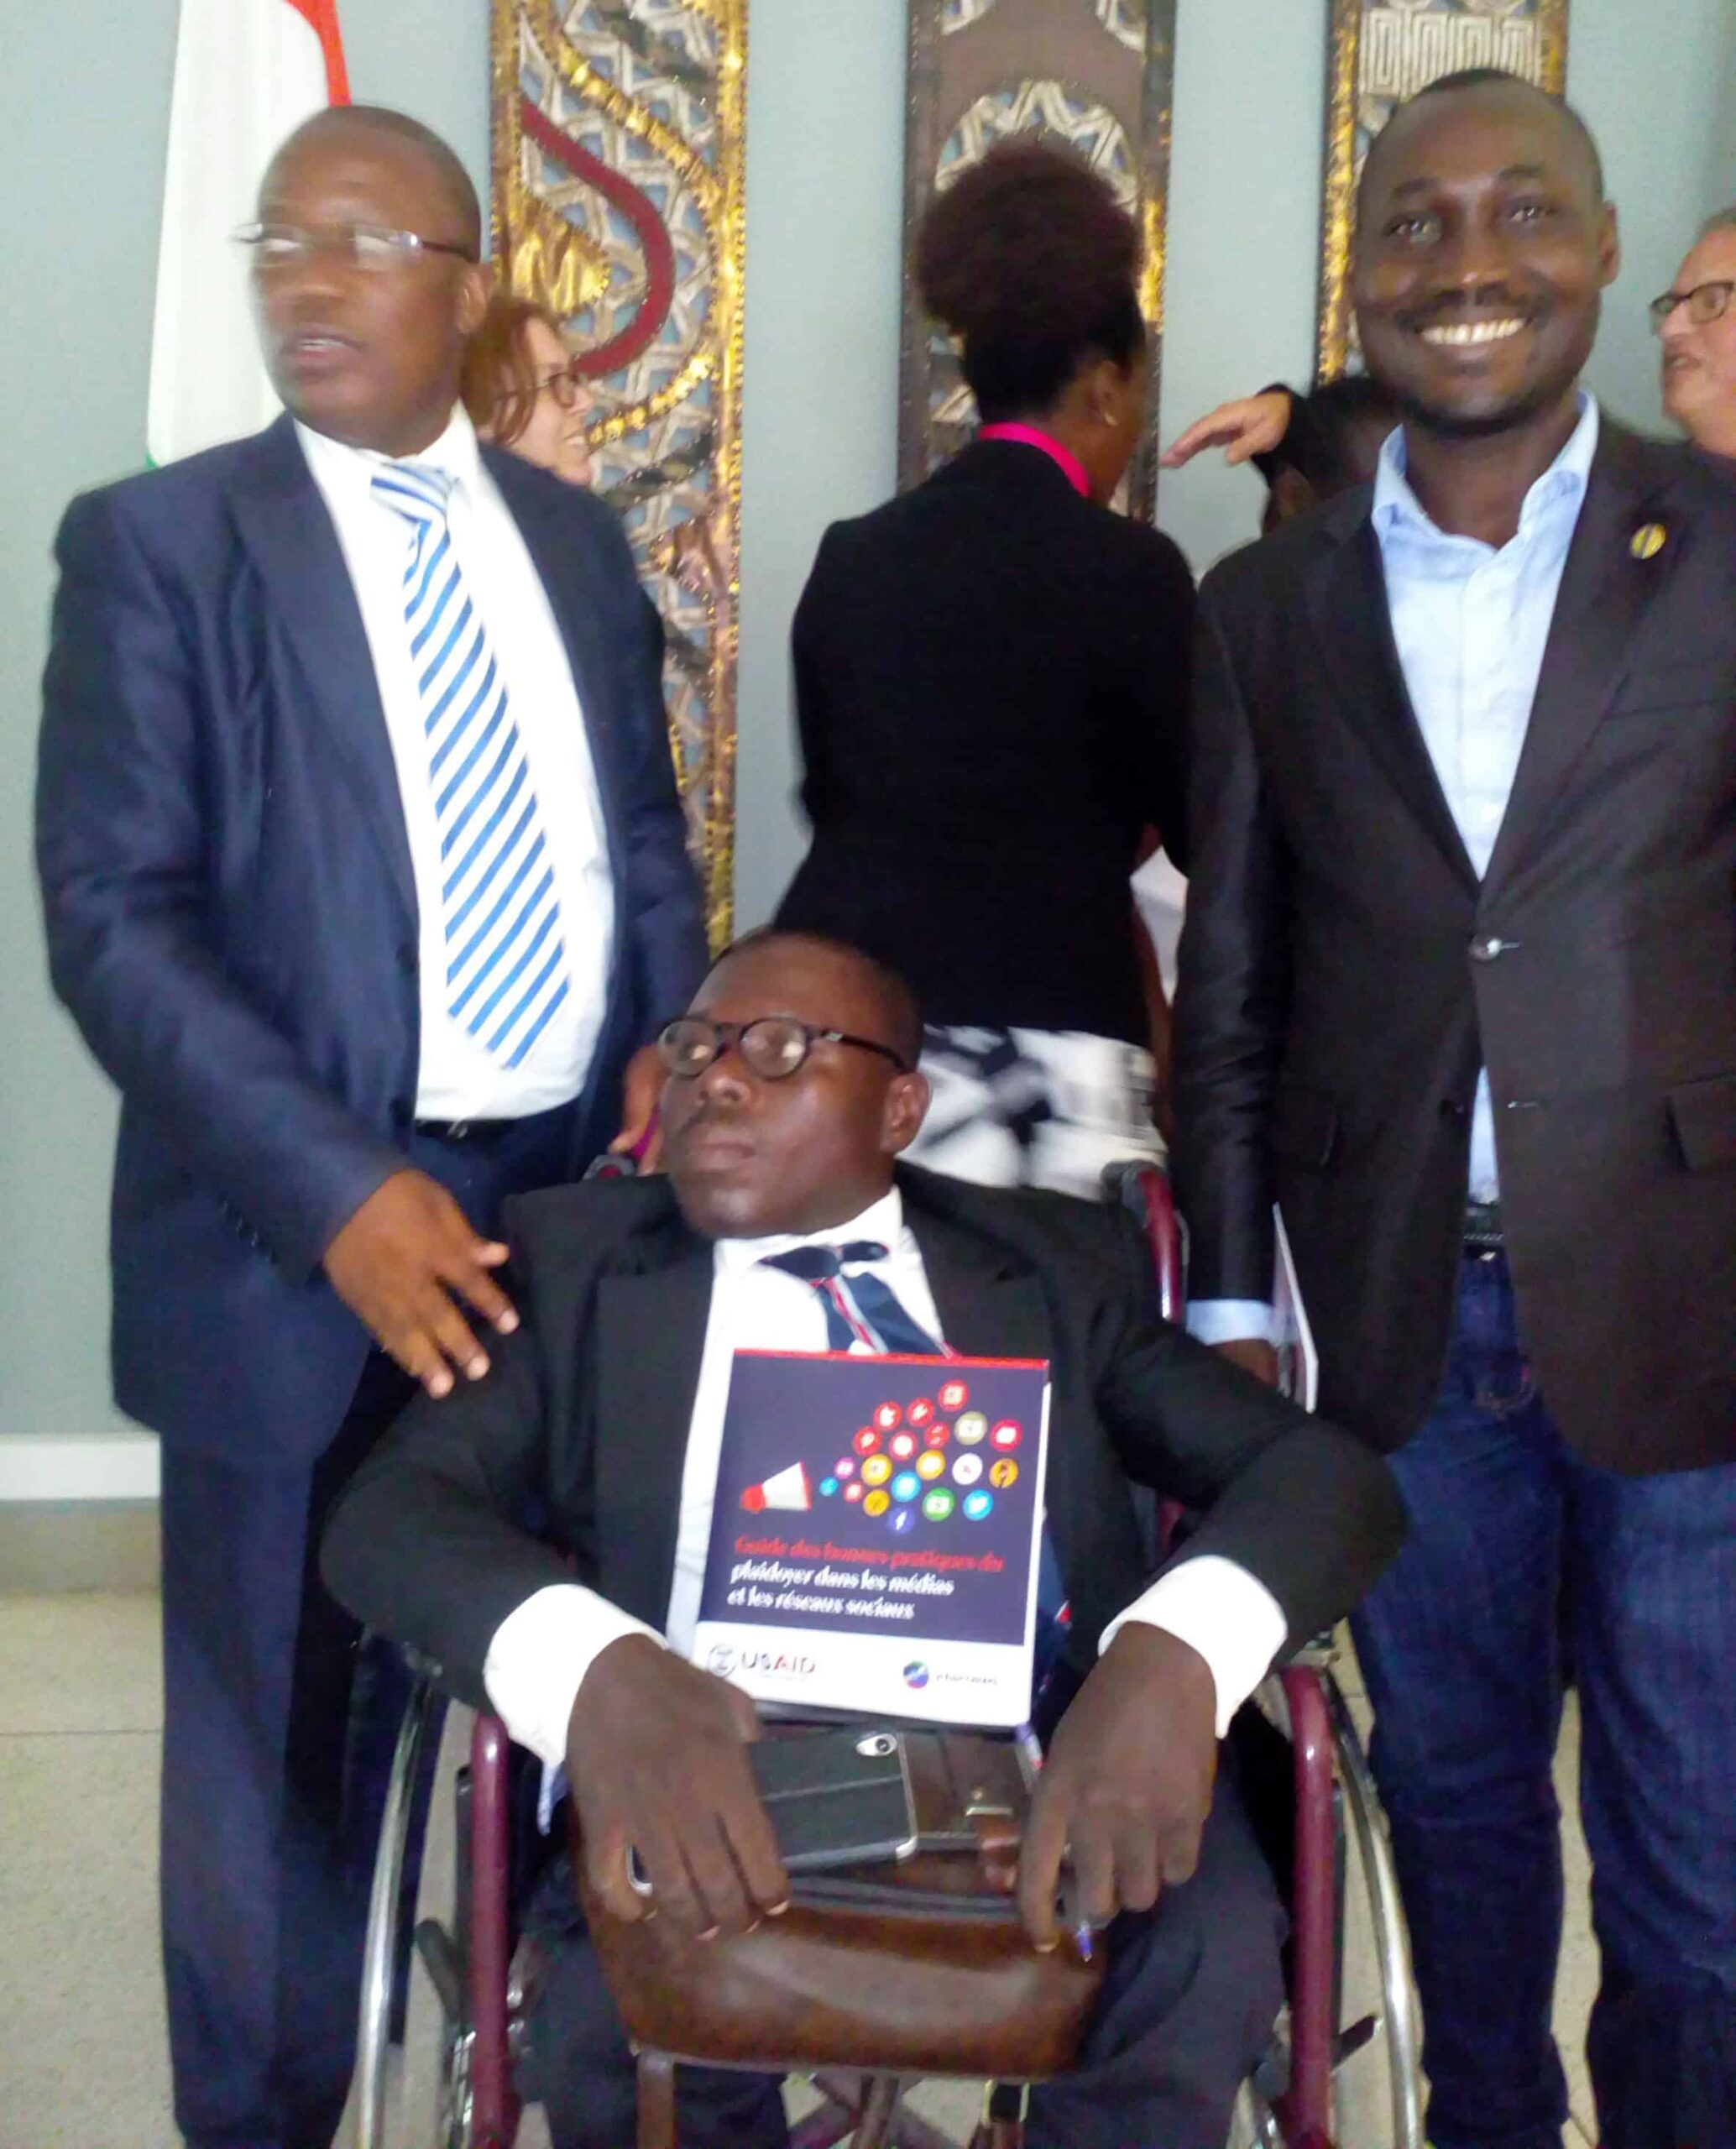 Two men stand next to a man in a wheelchair who is holding a book